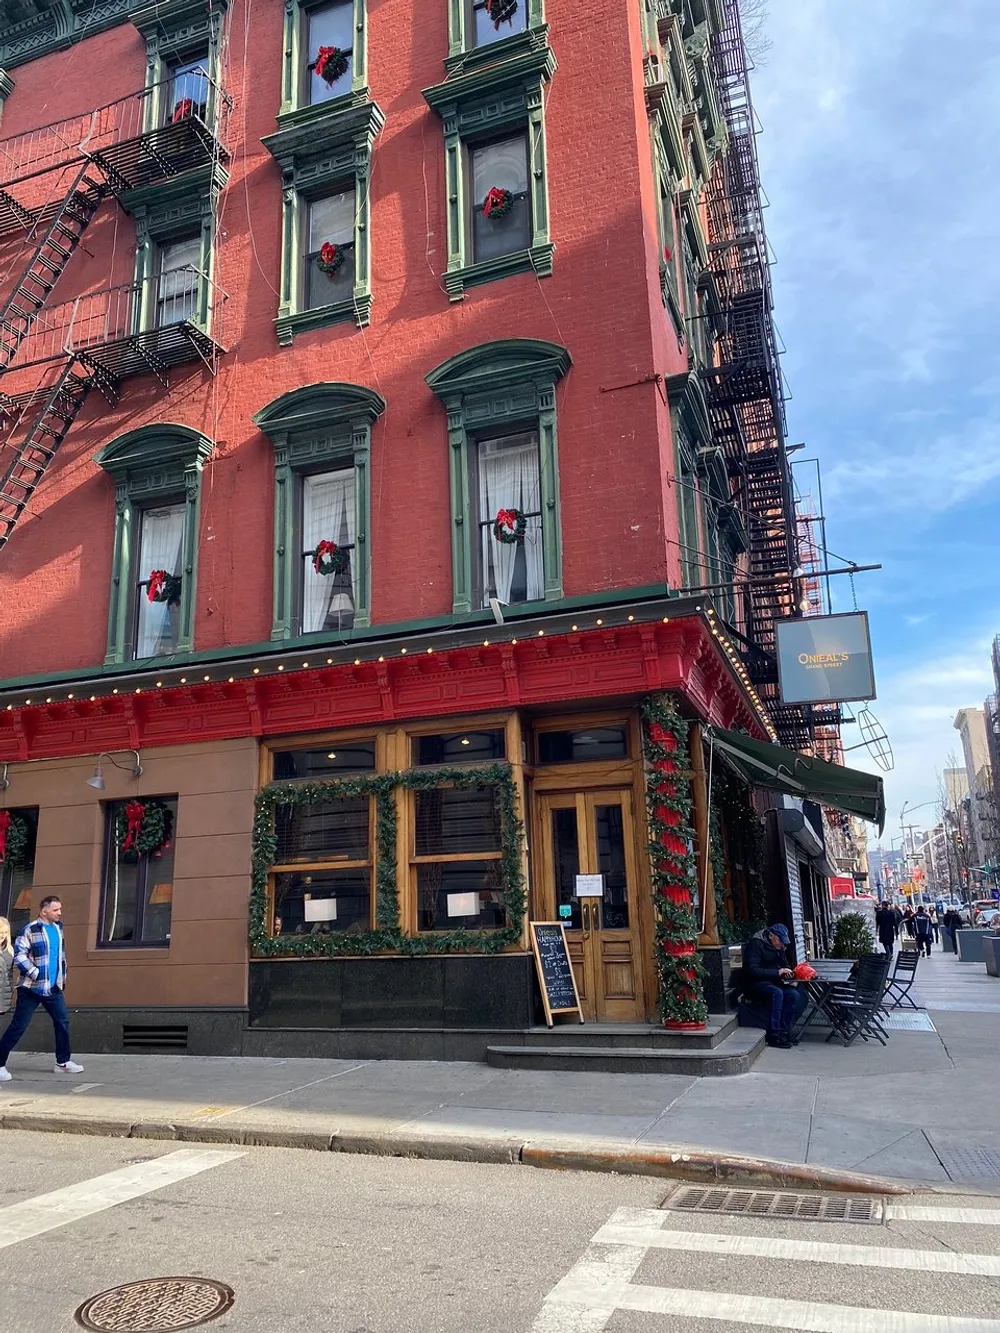 The image shows a festively decorated red brick corner building with green window frames and a fire escape likely a restaurant or bar with people walking by on an urban sunny day